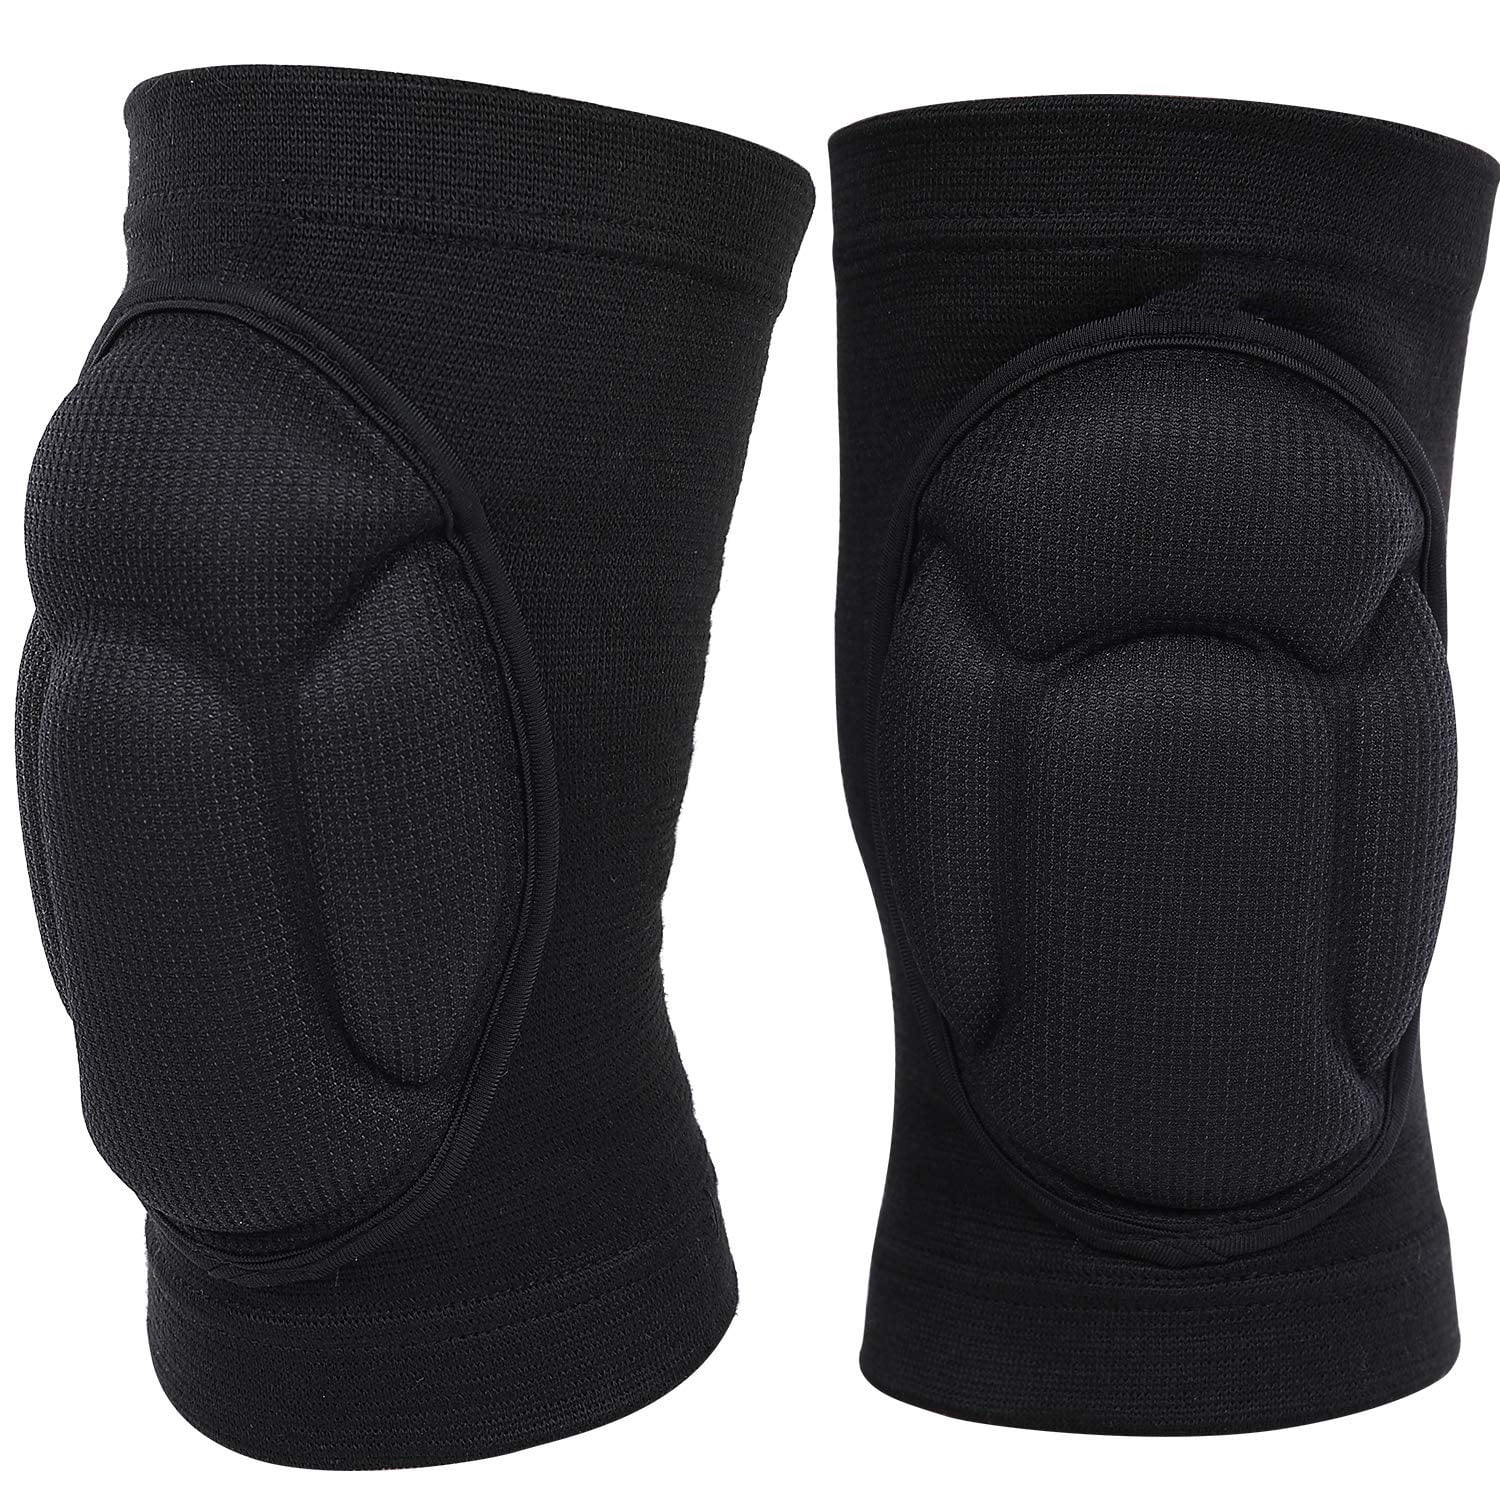 1 Pair Protective Knee Pads Black, S Thick EVA Sponge Anti-Collision Kneepads Protector Non-slip Wrestling Dance Knee Pads Support Sleeve for Basketball Football Skating Skiing